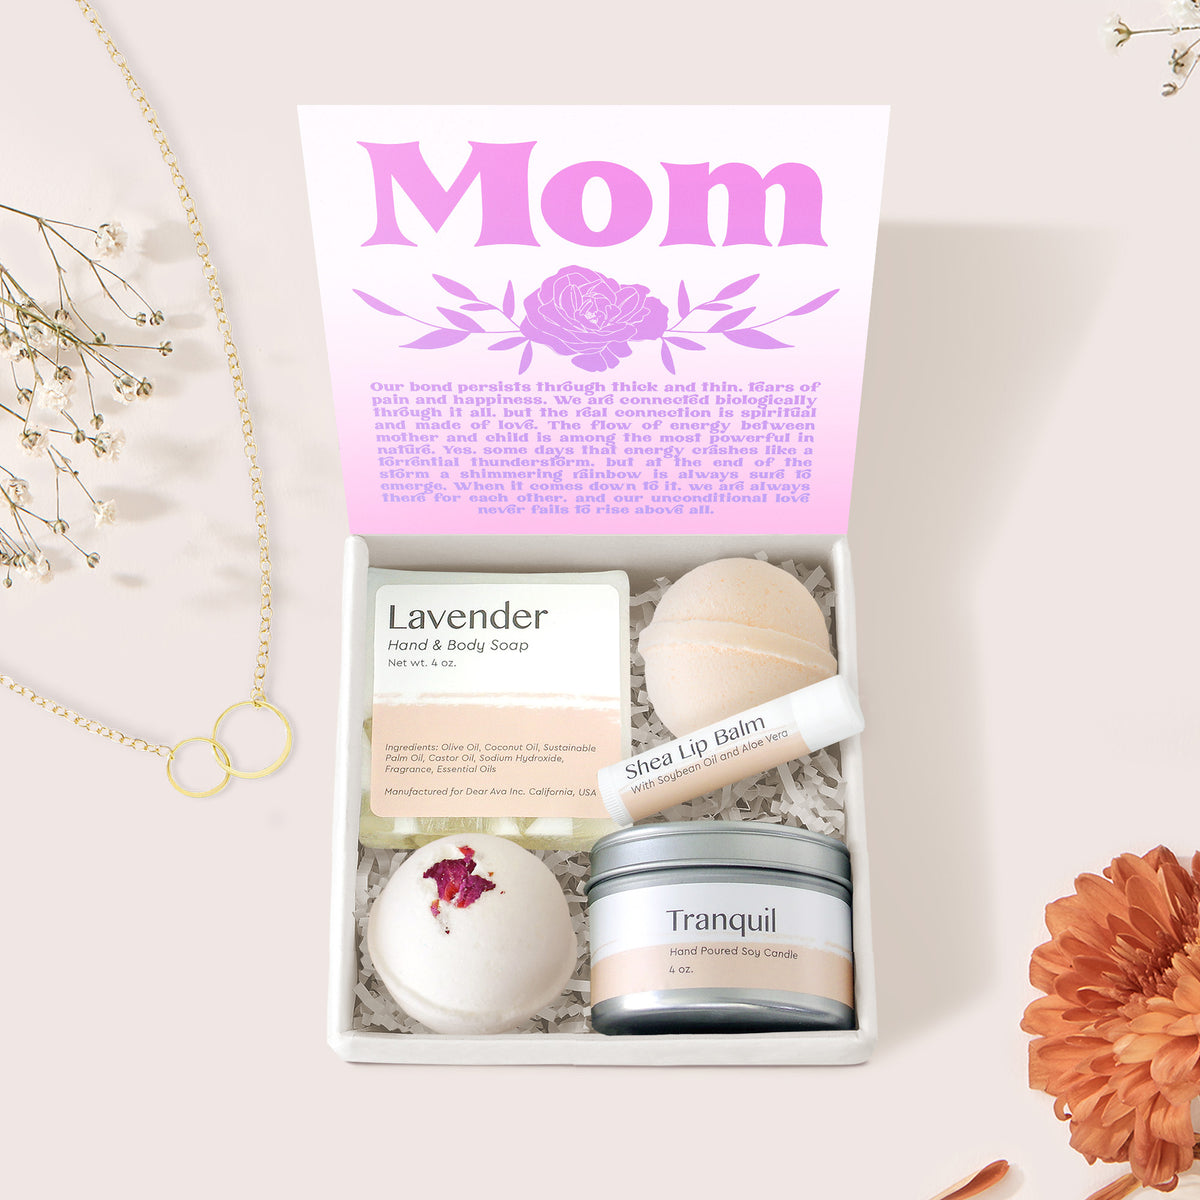 Mom Double Circle Necklace Gift Box Set